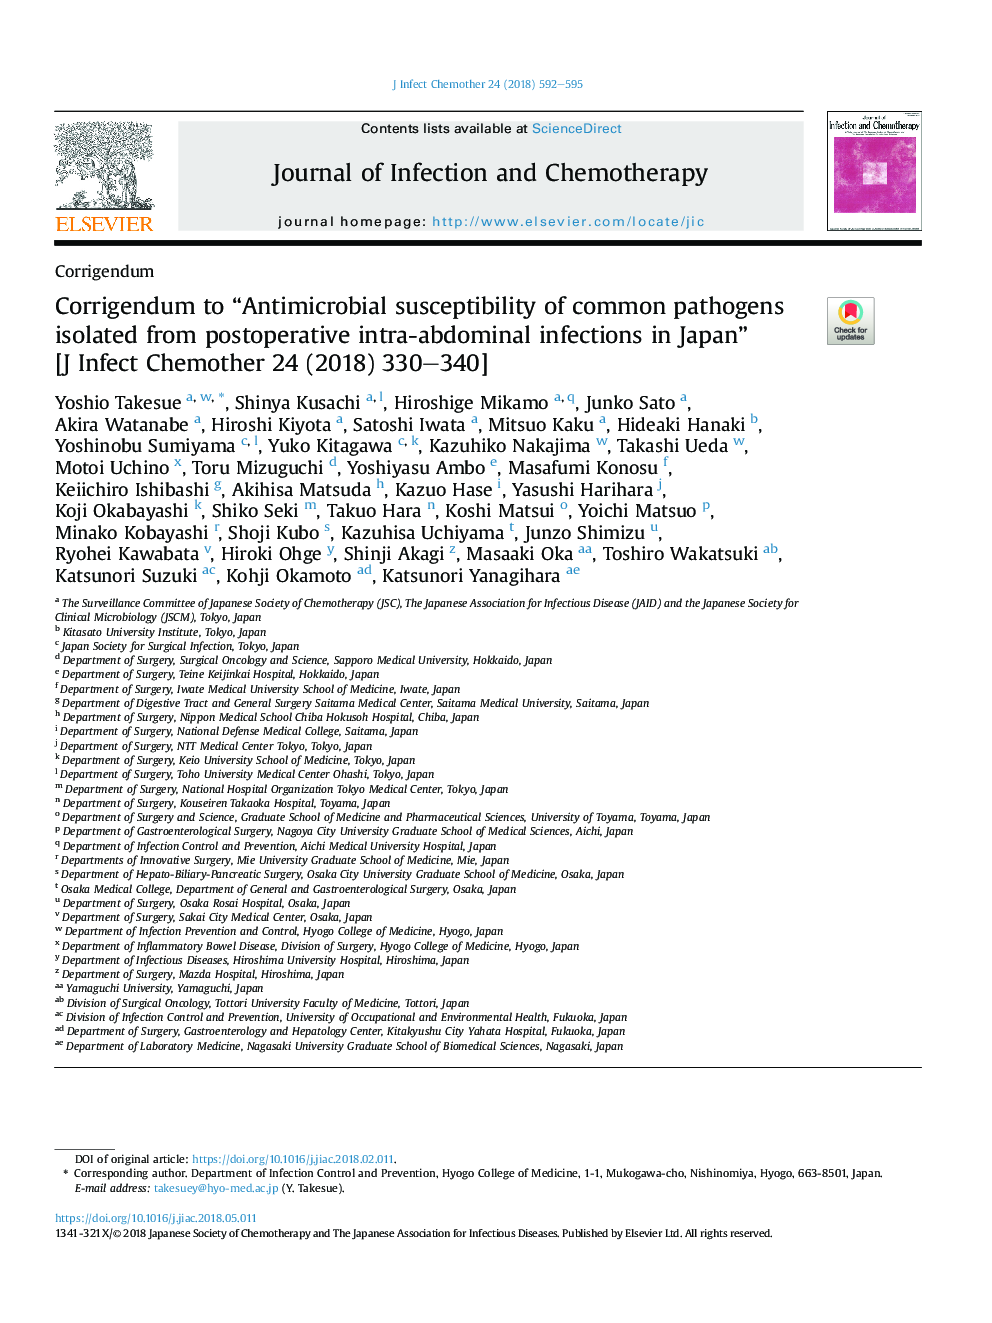 Corrigendum to “Antimicrobial susceptibility of common pathogens isolated from postoperative intra-abdominal infections in Japan” [JÂ Infect Chemother 24 (2018) 330-340]